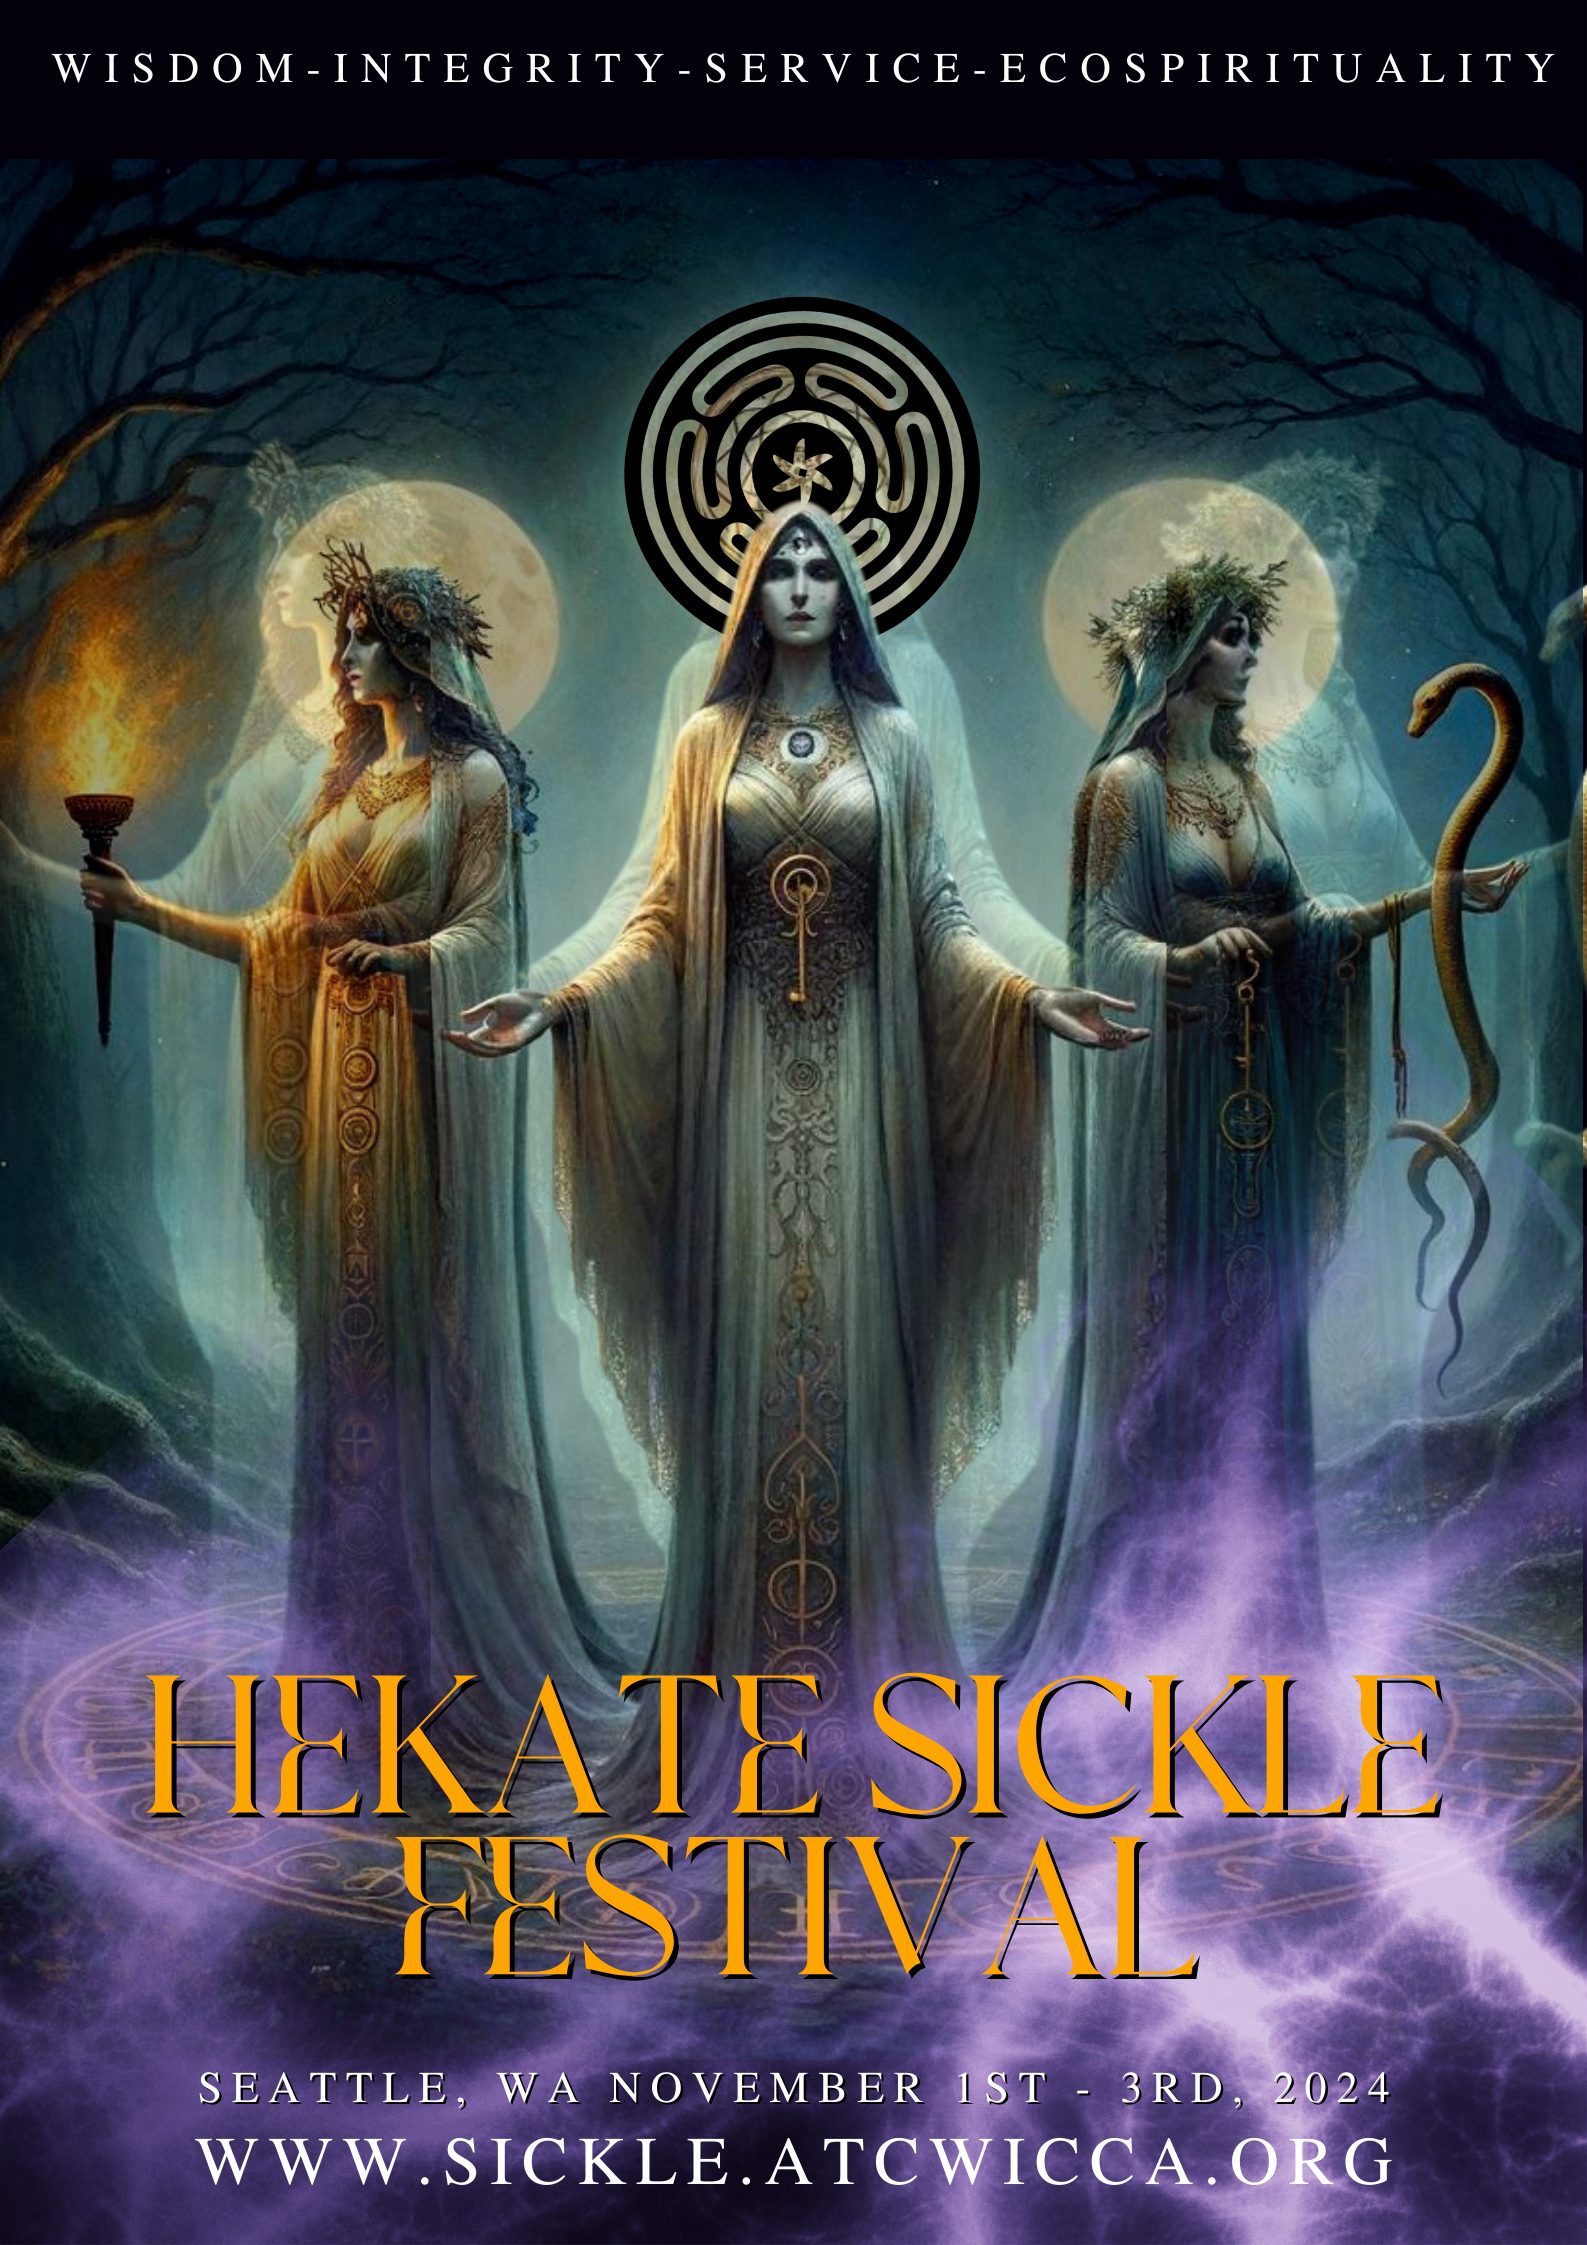 A poster for the Hekate Sickle Festival, showing three Goddesses.